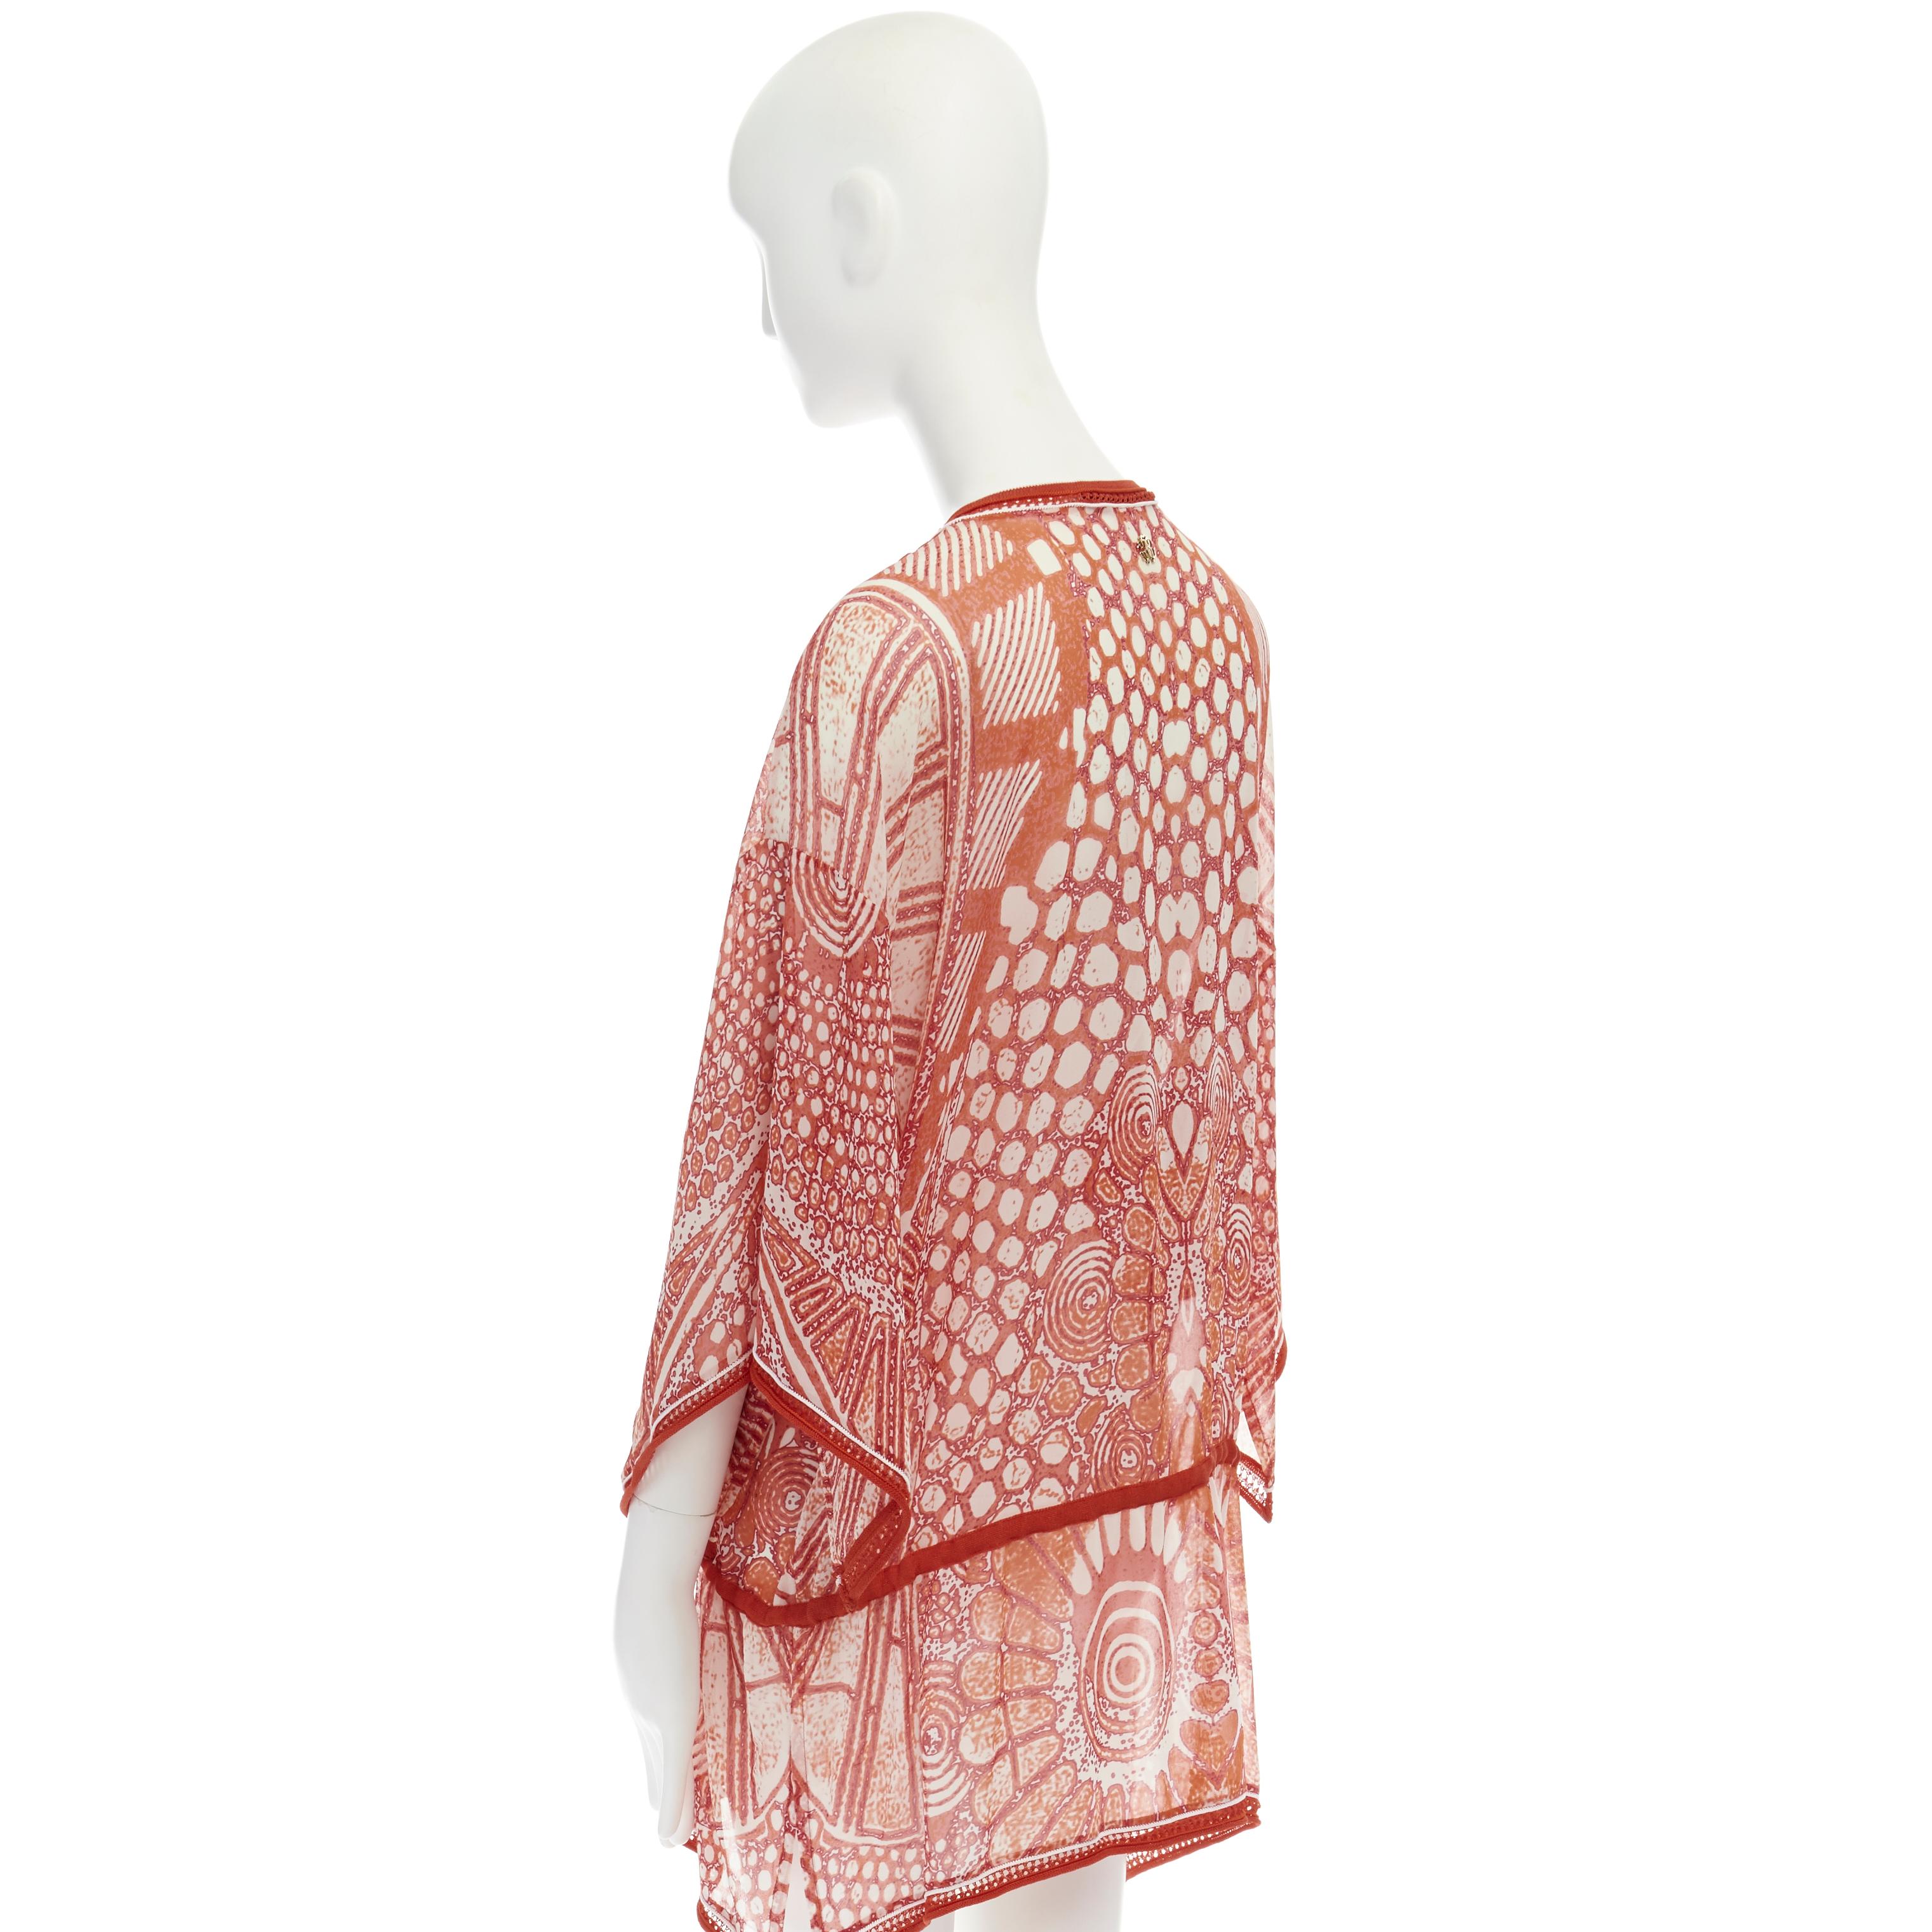 ROBERTO CAVALLI 100% silk red tropical floral crochet seam poncho cover up top S 1